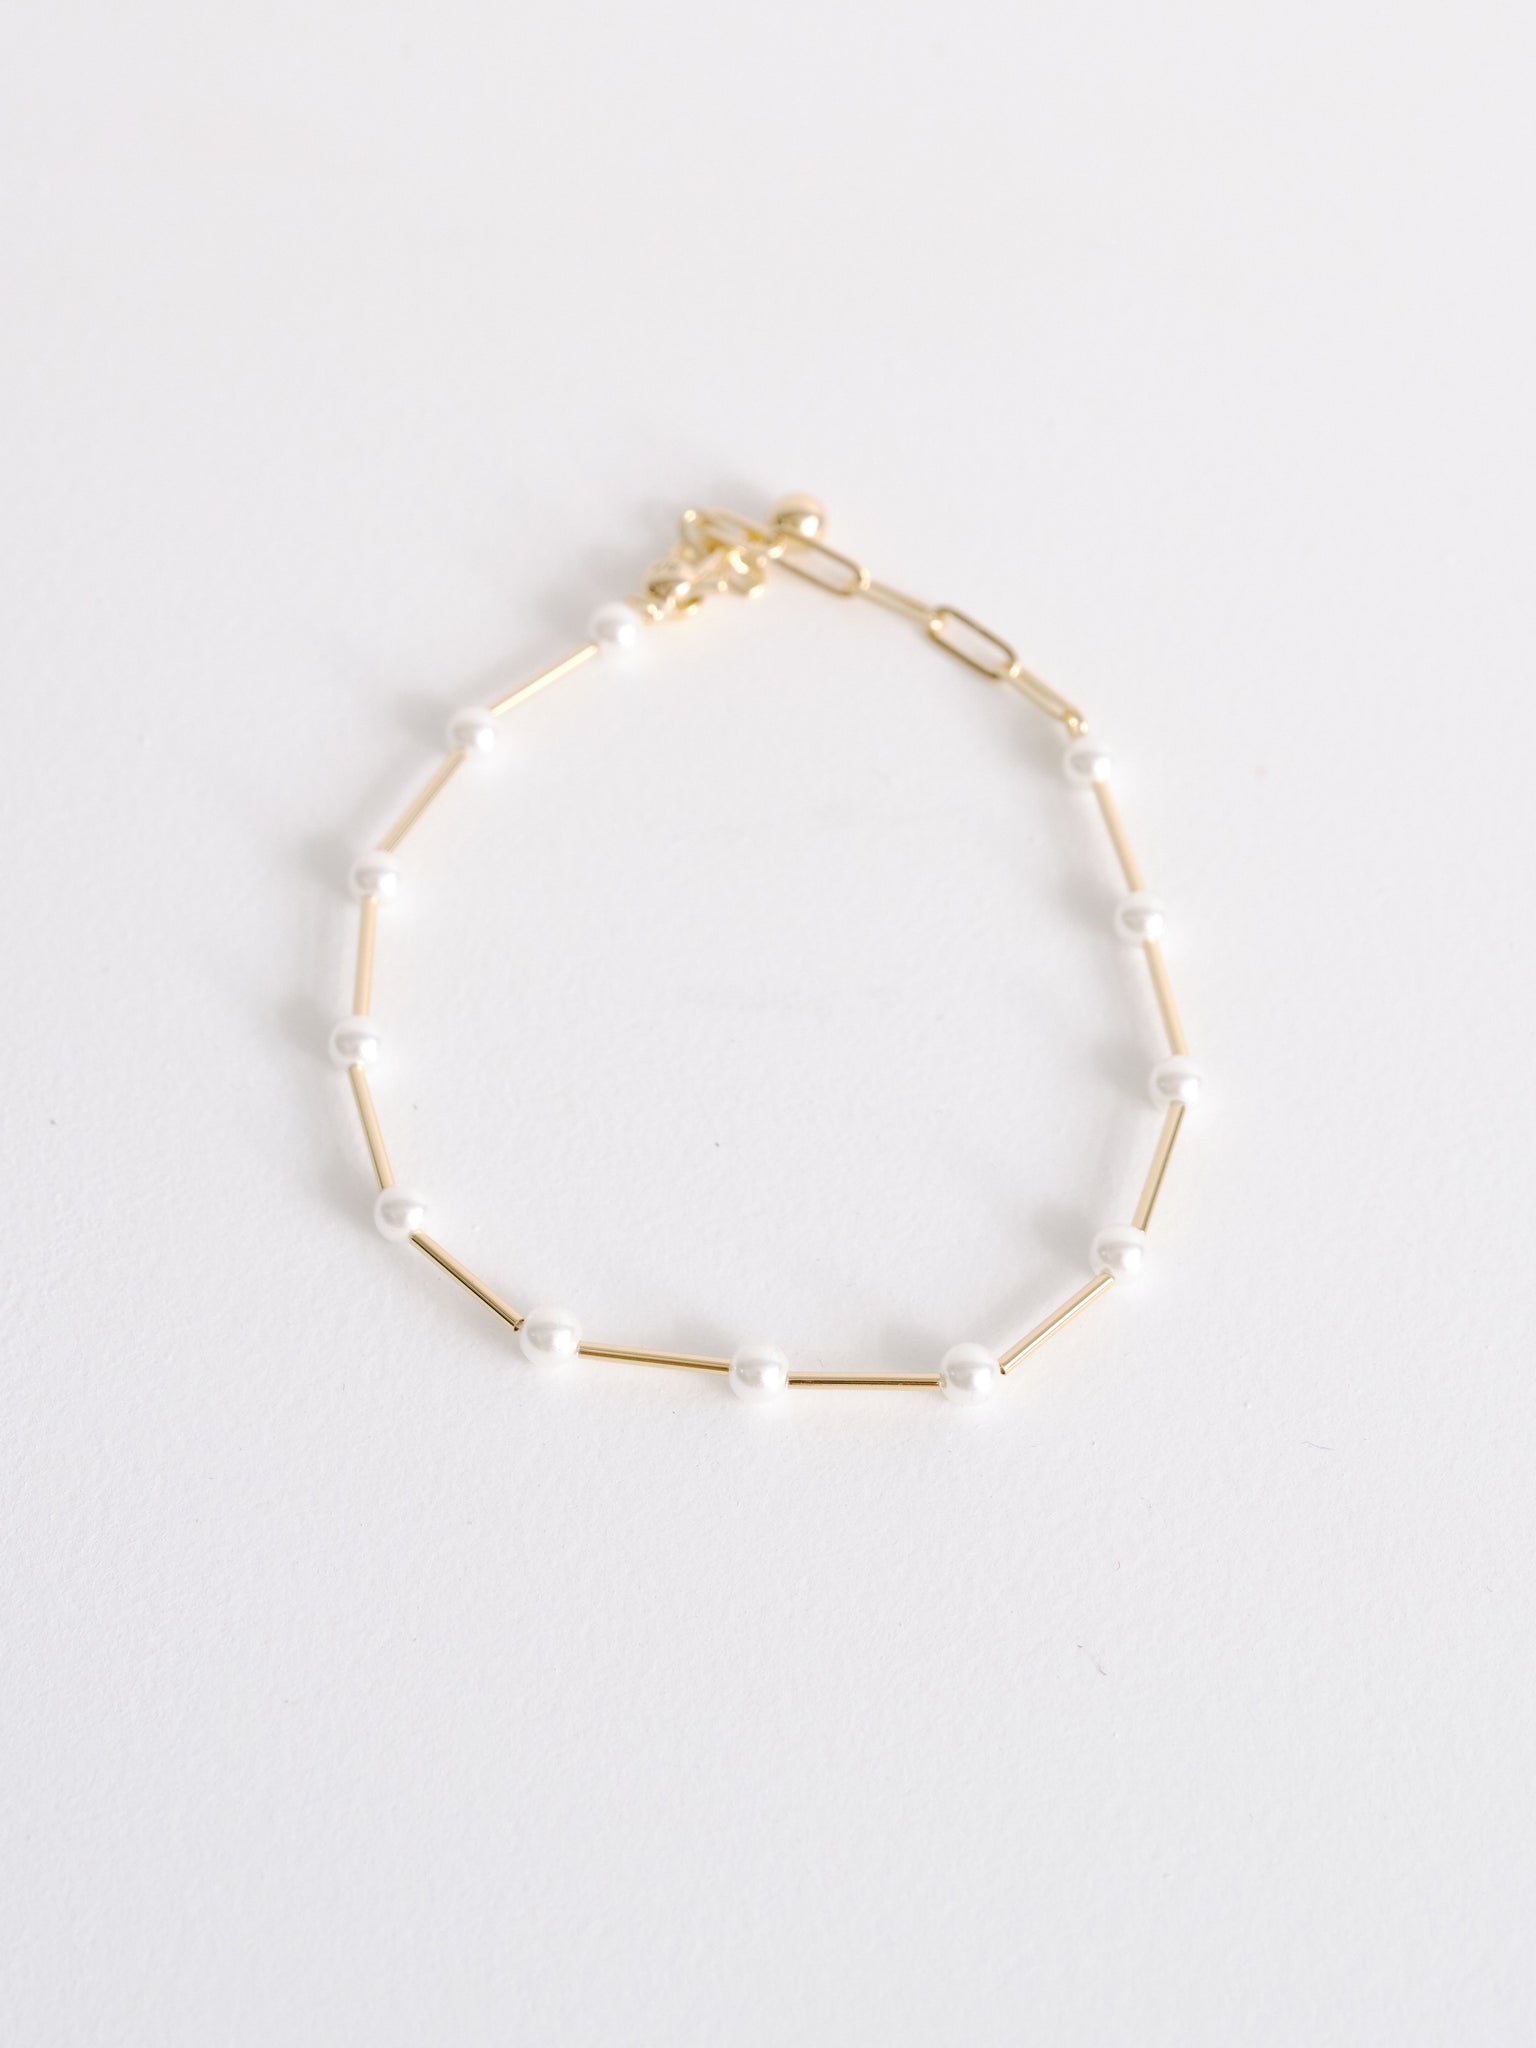 Pearl and Gold Choker